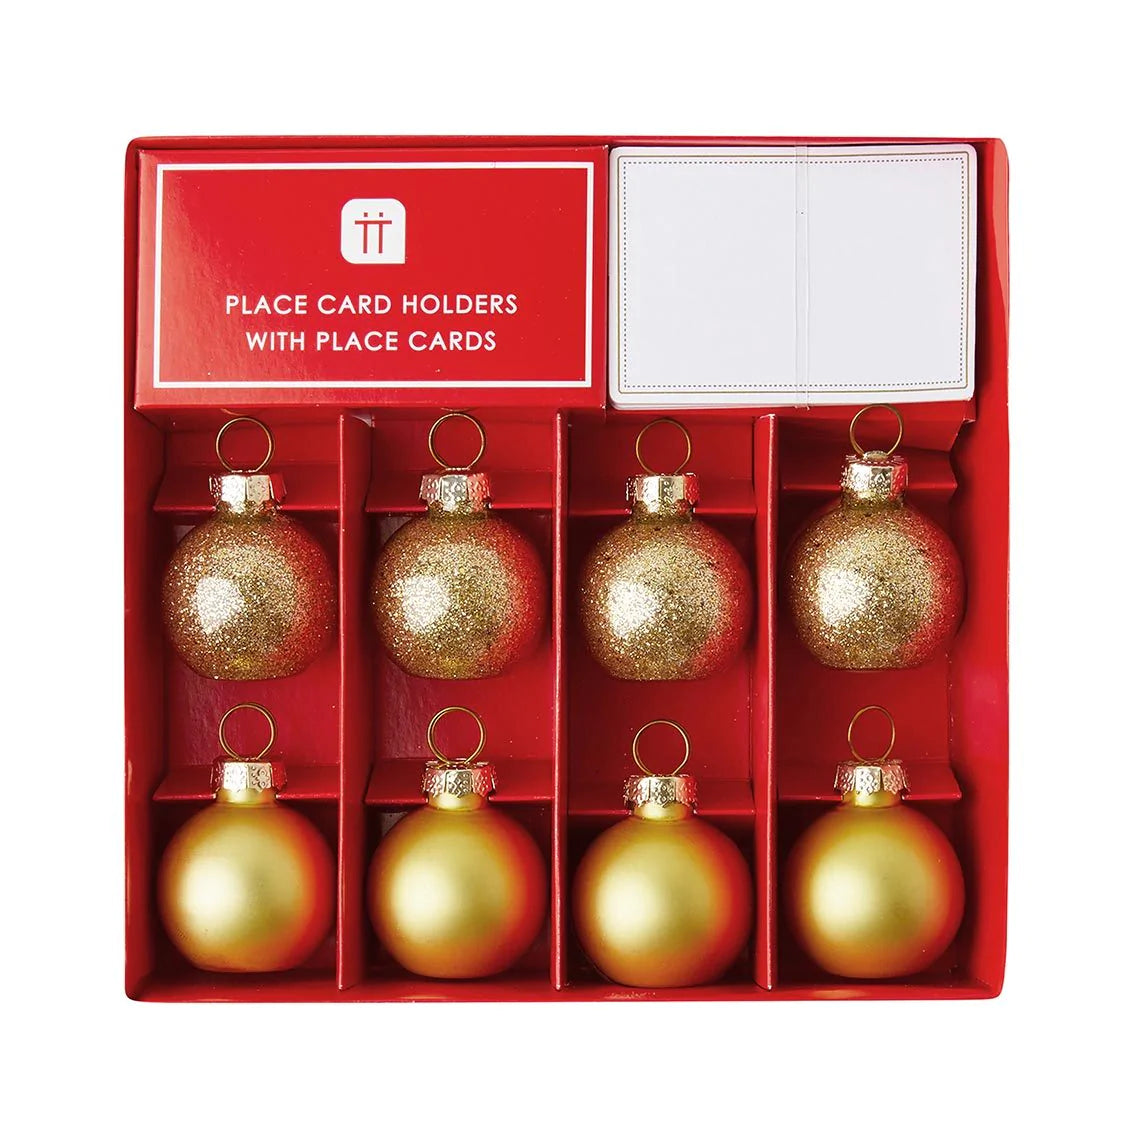 Gold Bauble Place Card Holders - 8 Pack, 24 Place Cards